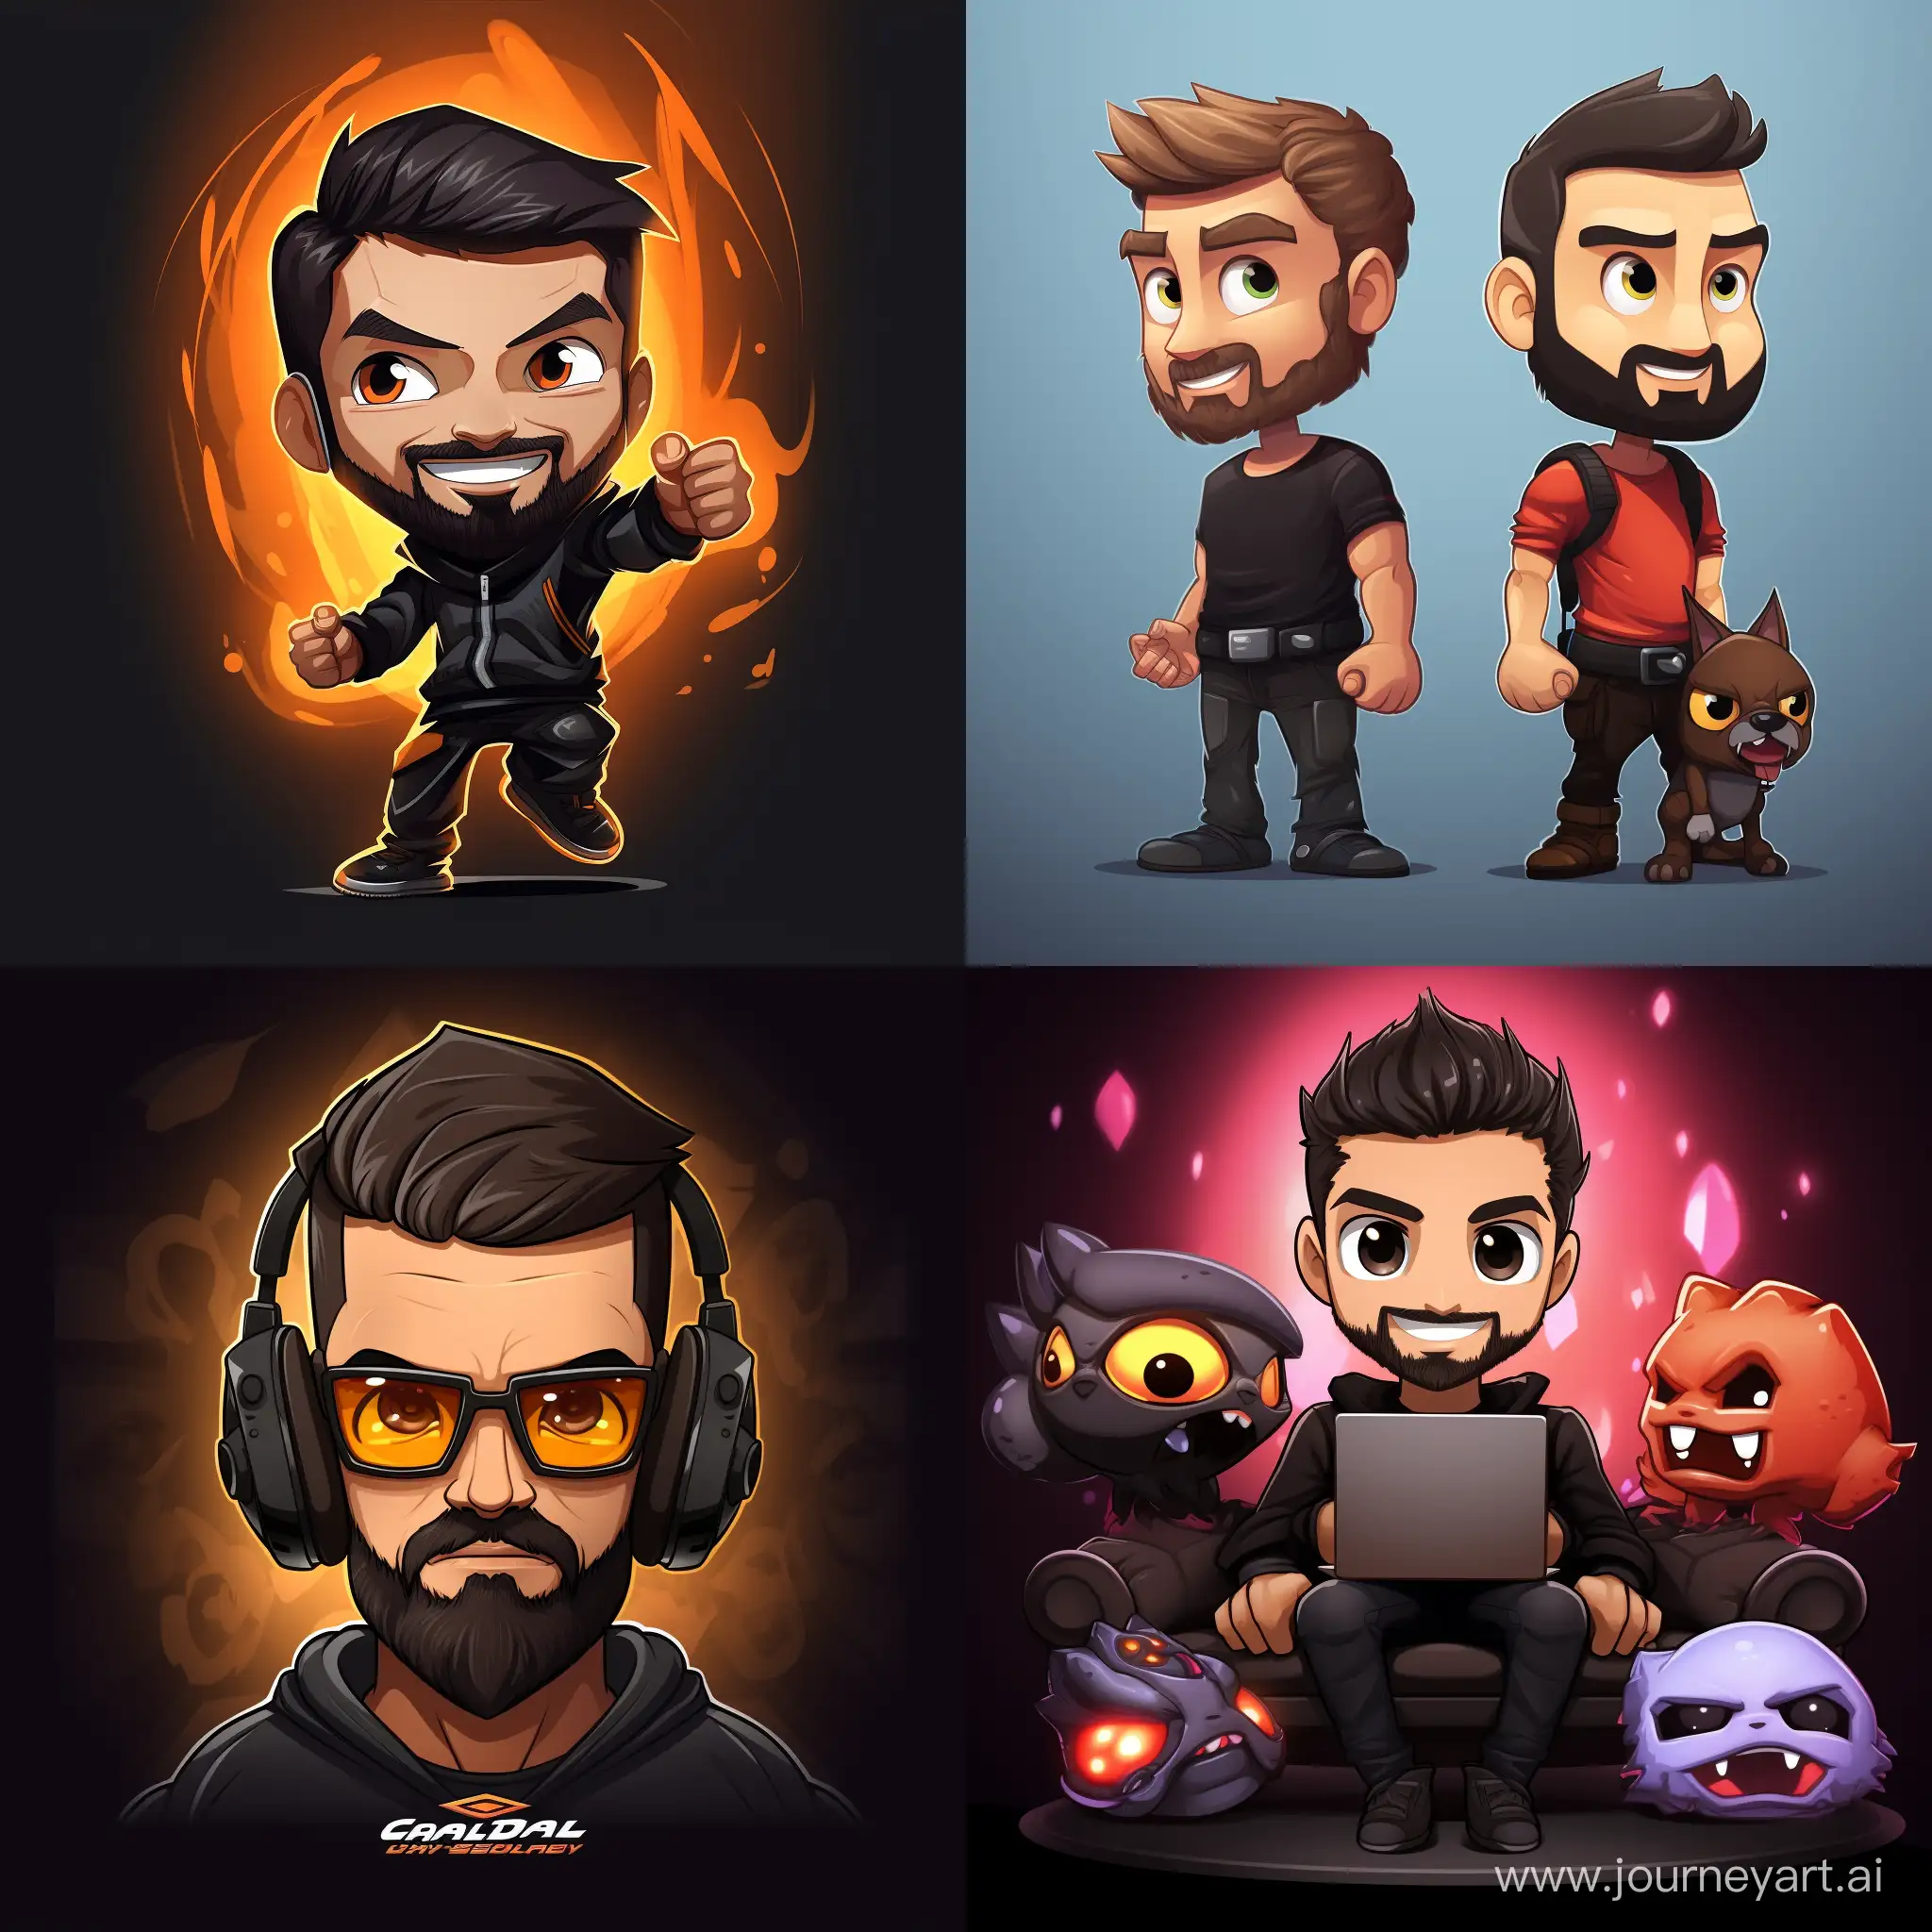 Playful-Gaming-Logo-Mascot-in-Cartoon-Caricature-Style